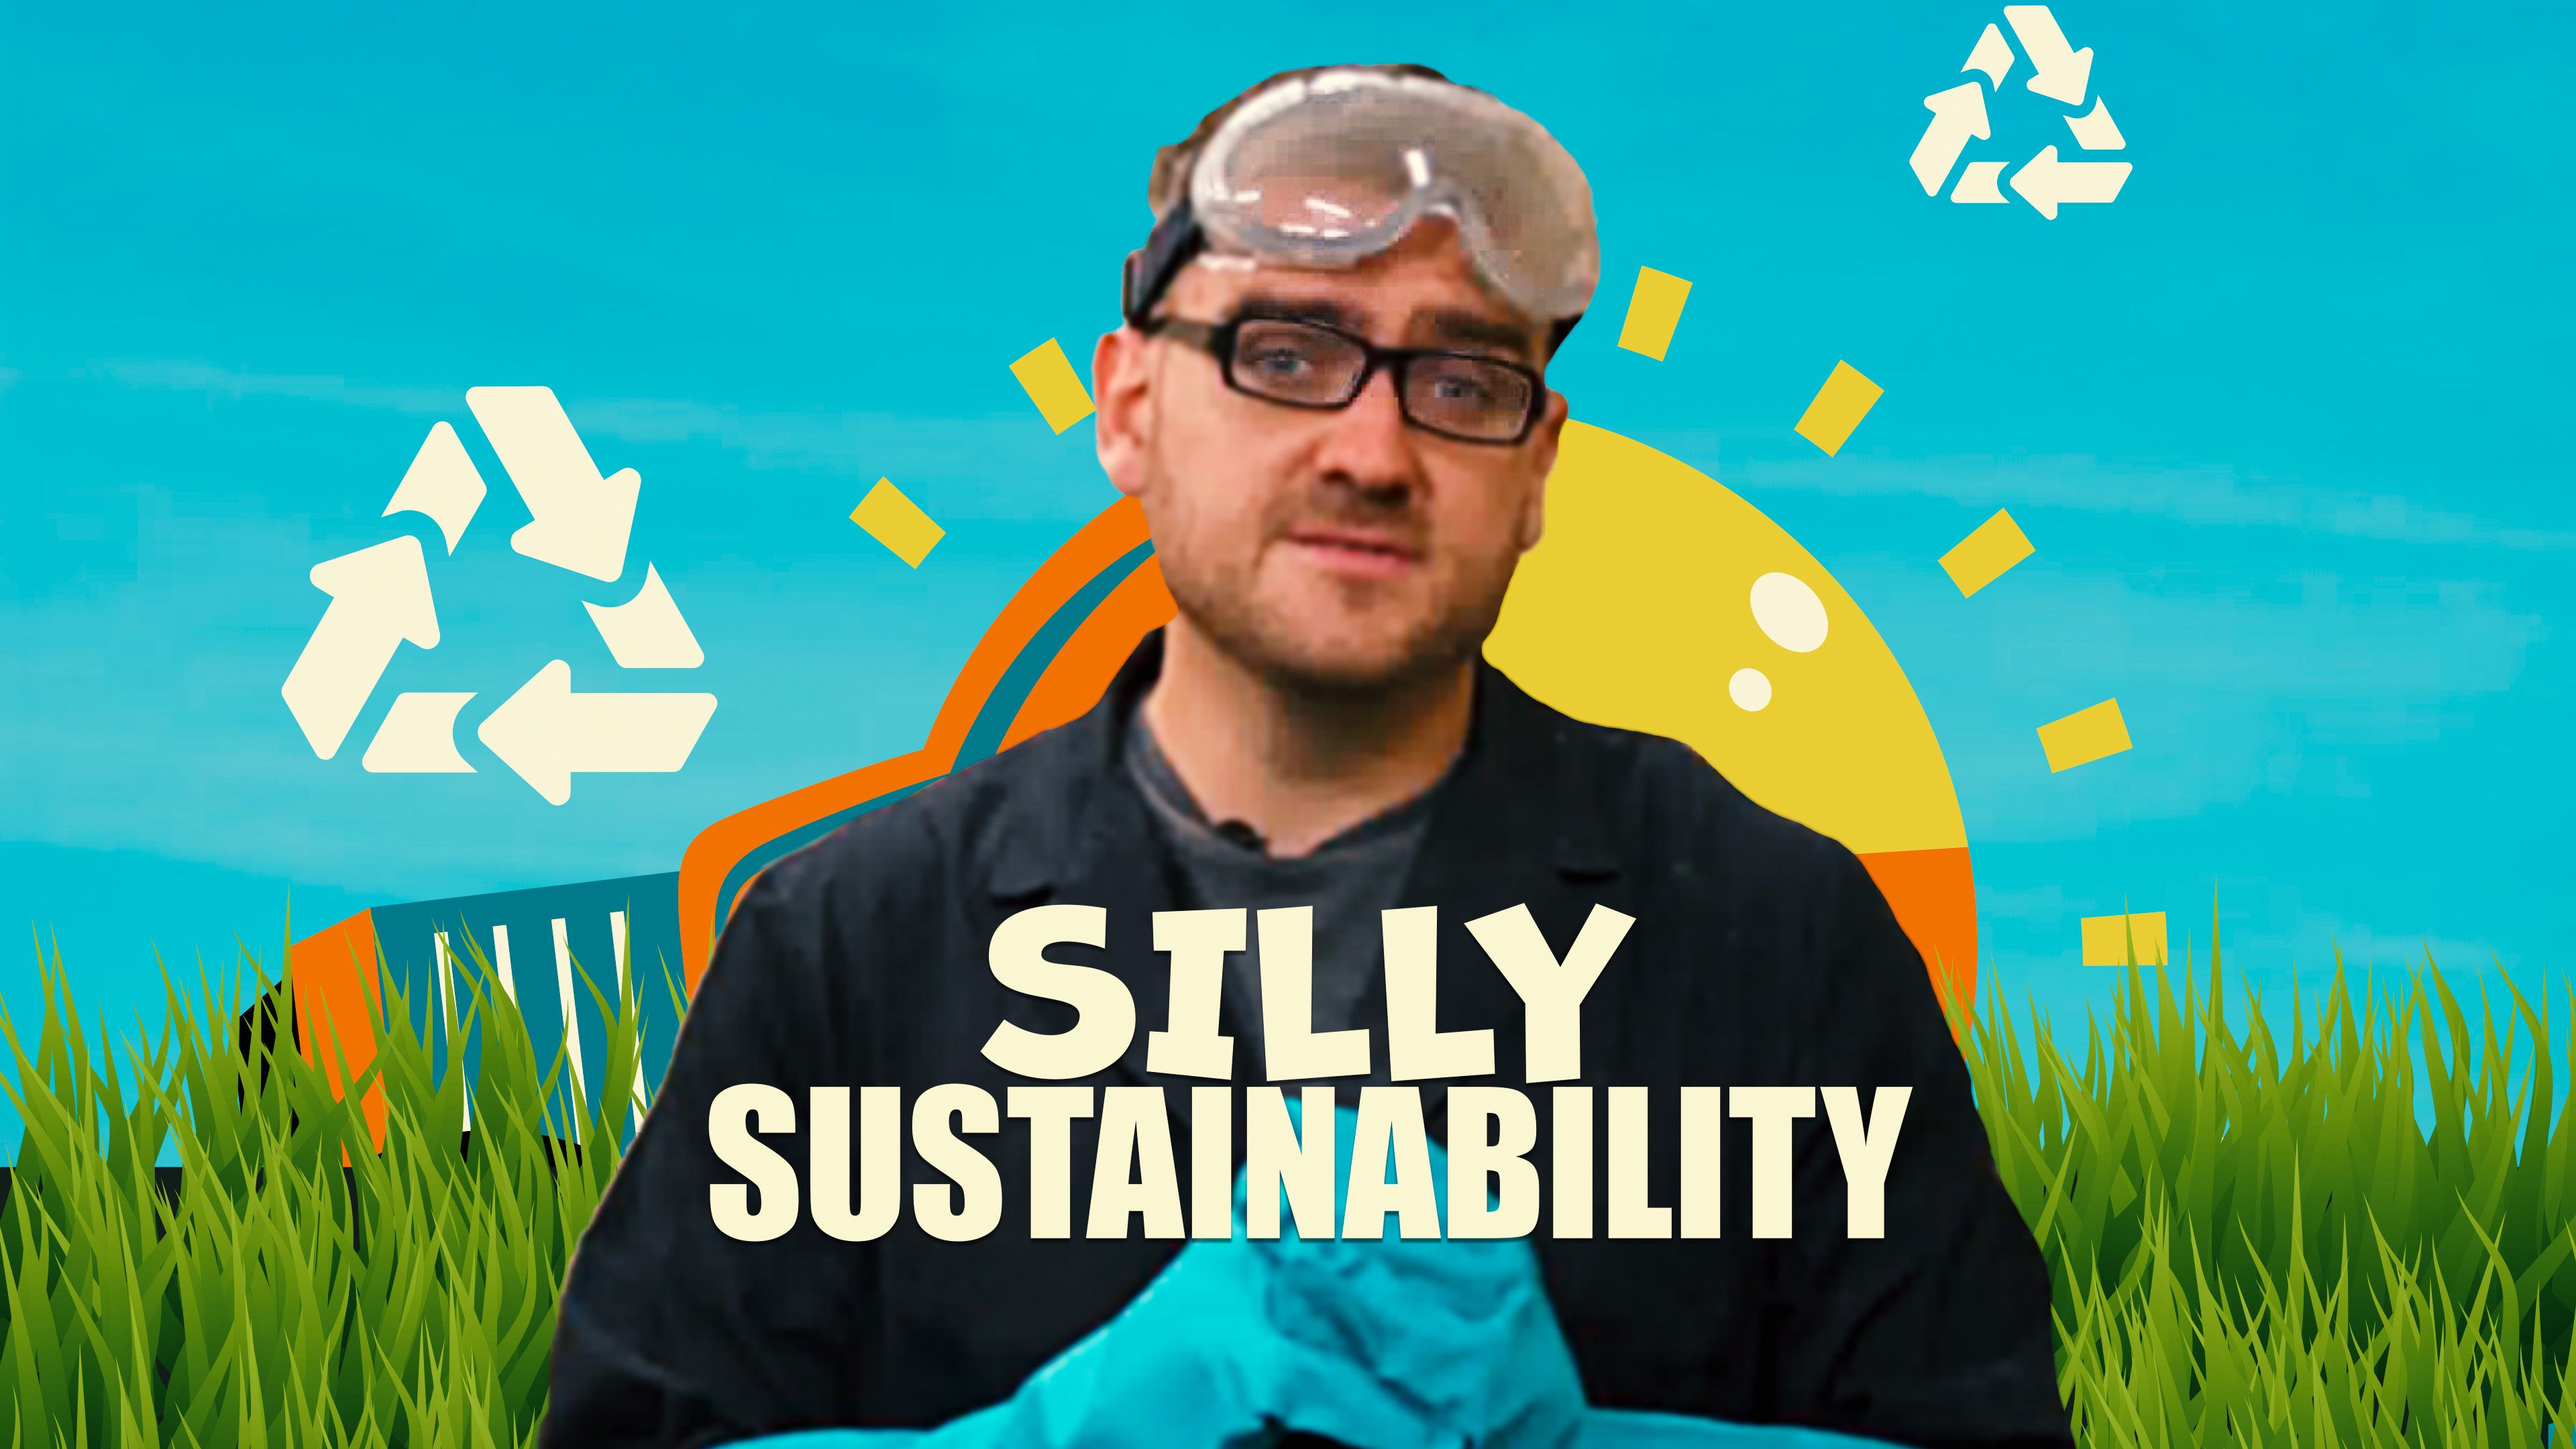 Silly Sustainability